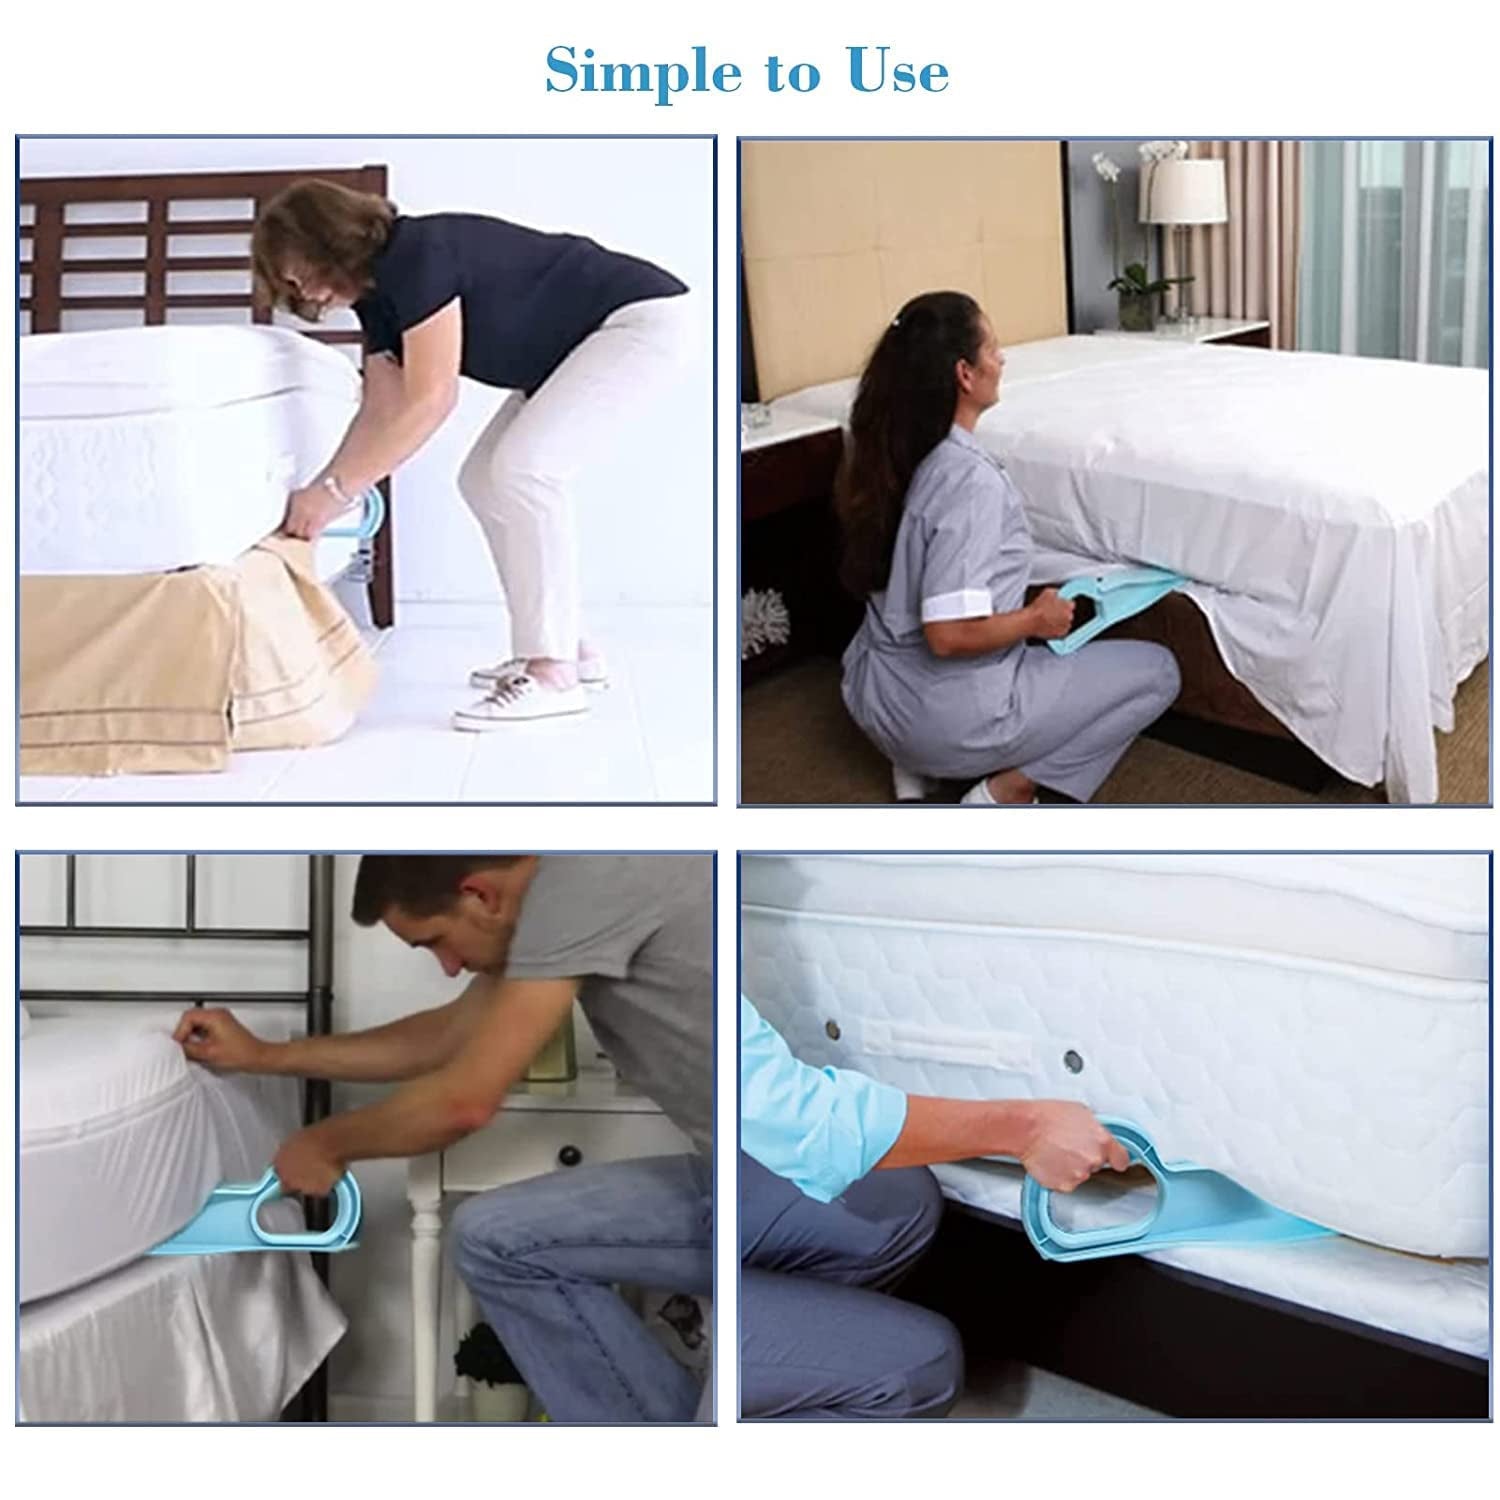 9013s Mattress Lifter Bed Making & Change Bed Sheets Instantly helping Tool ( 1 pc ) DeoDap